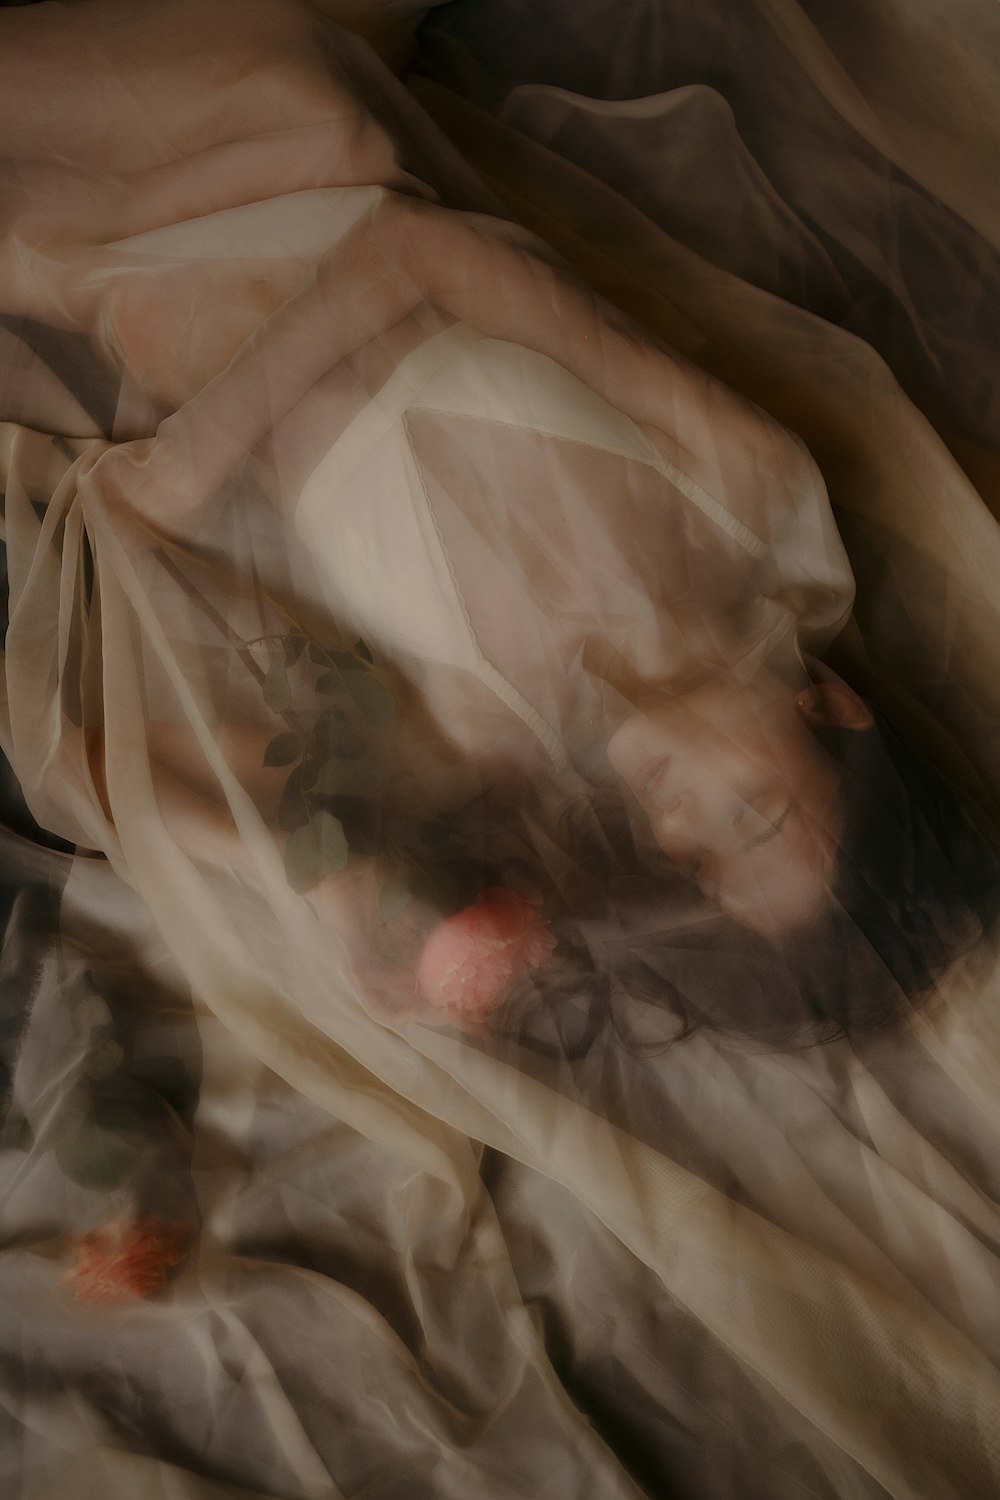 a blurry image of a woman laying on a bed